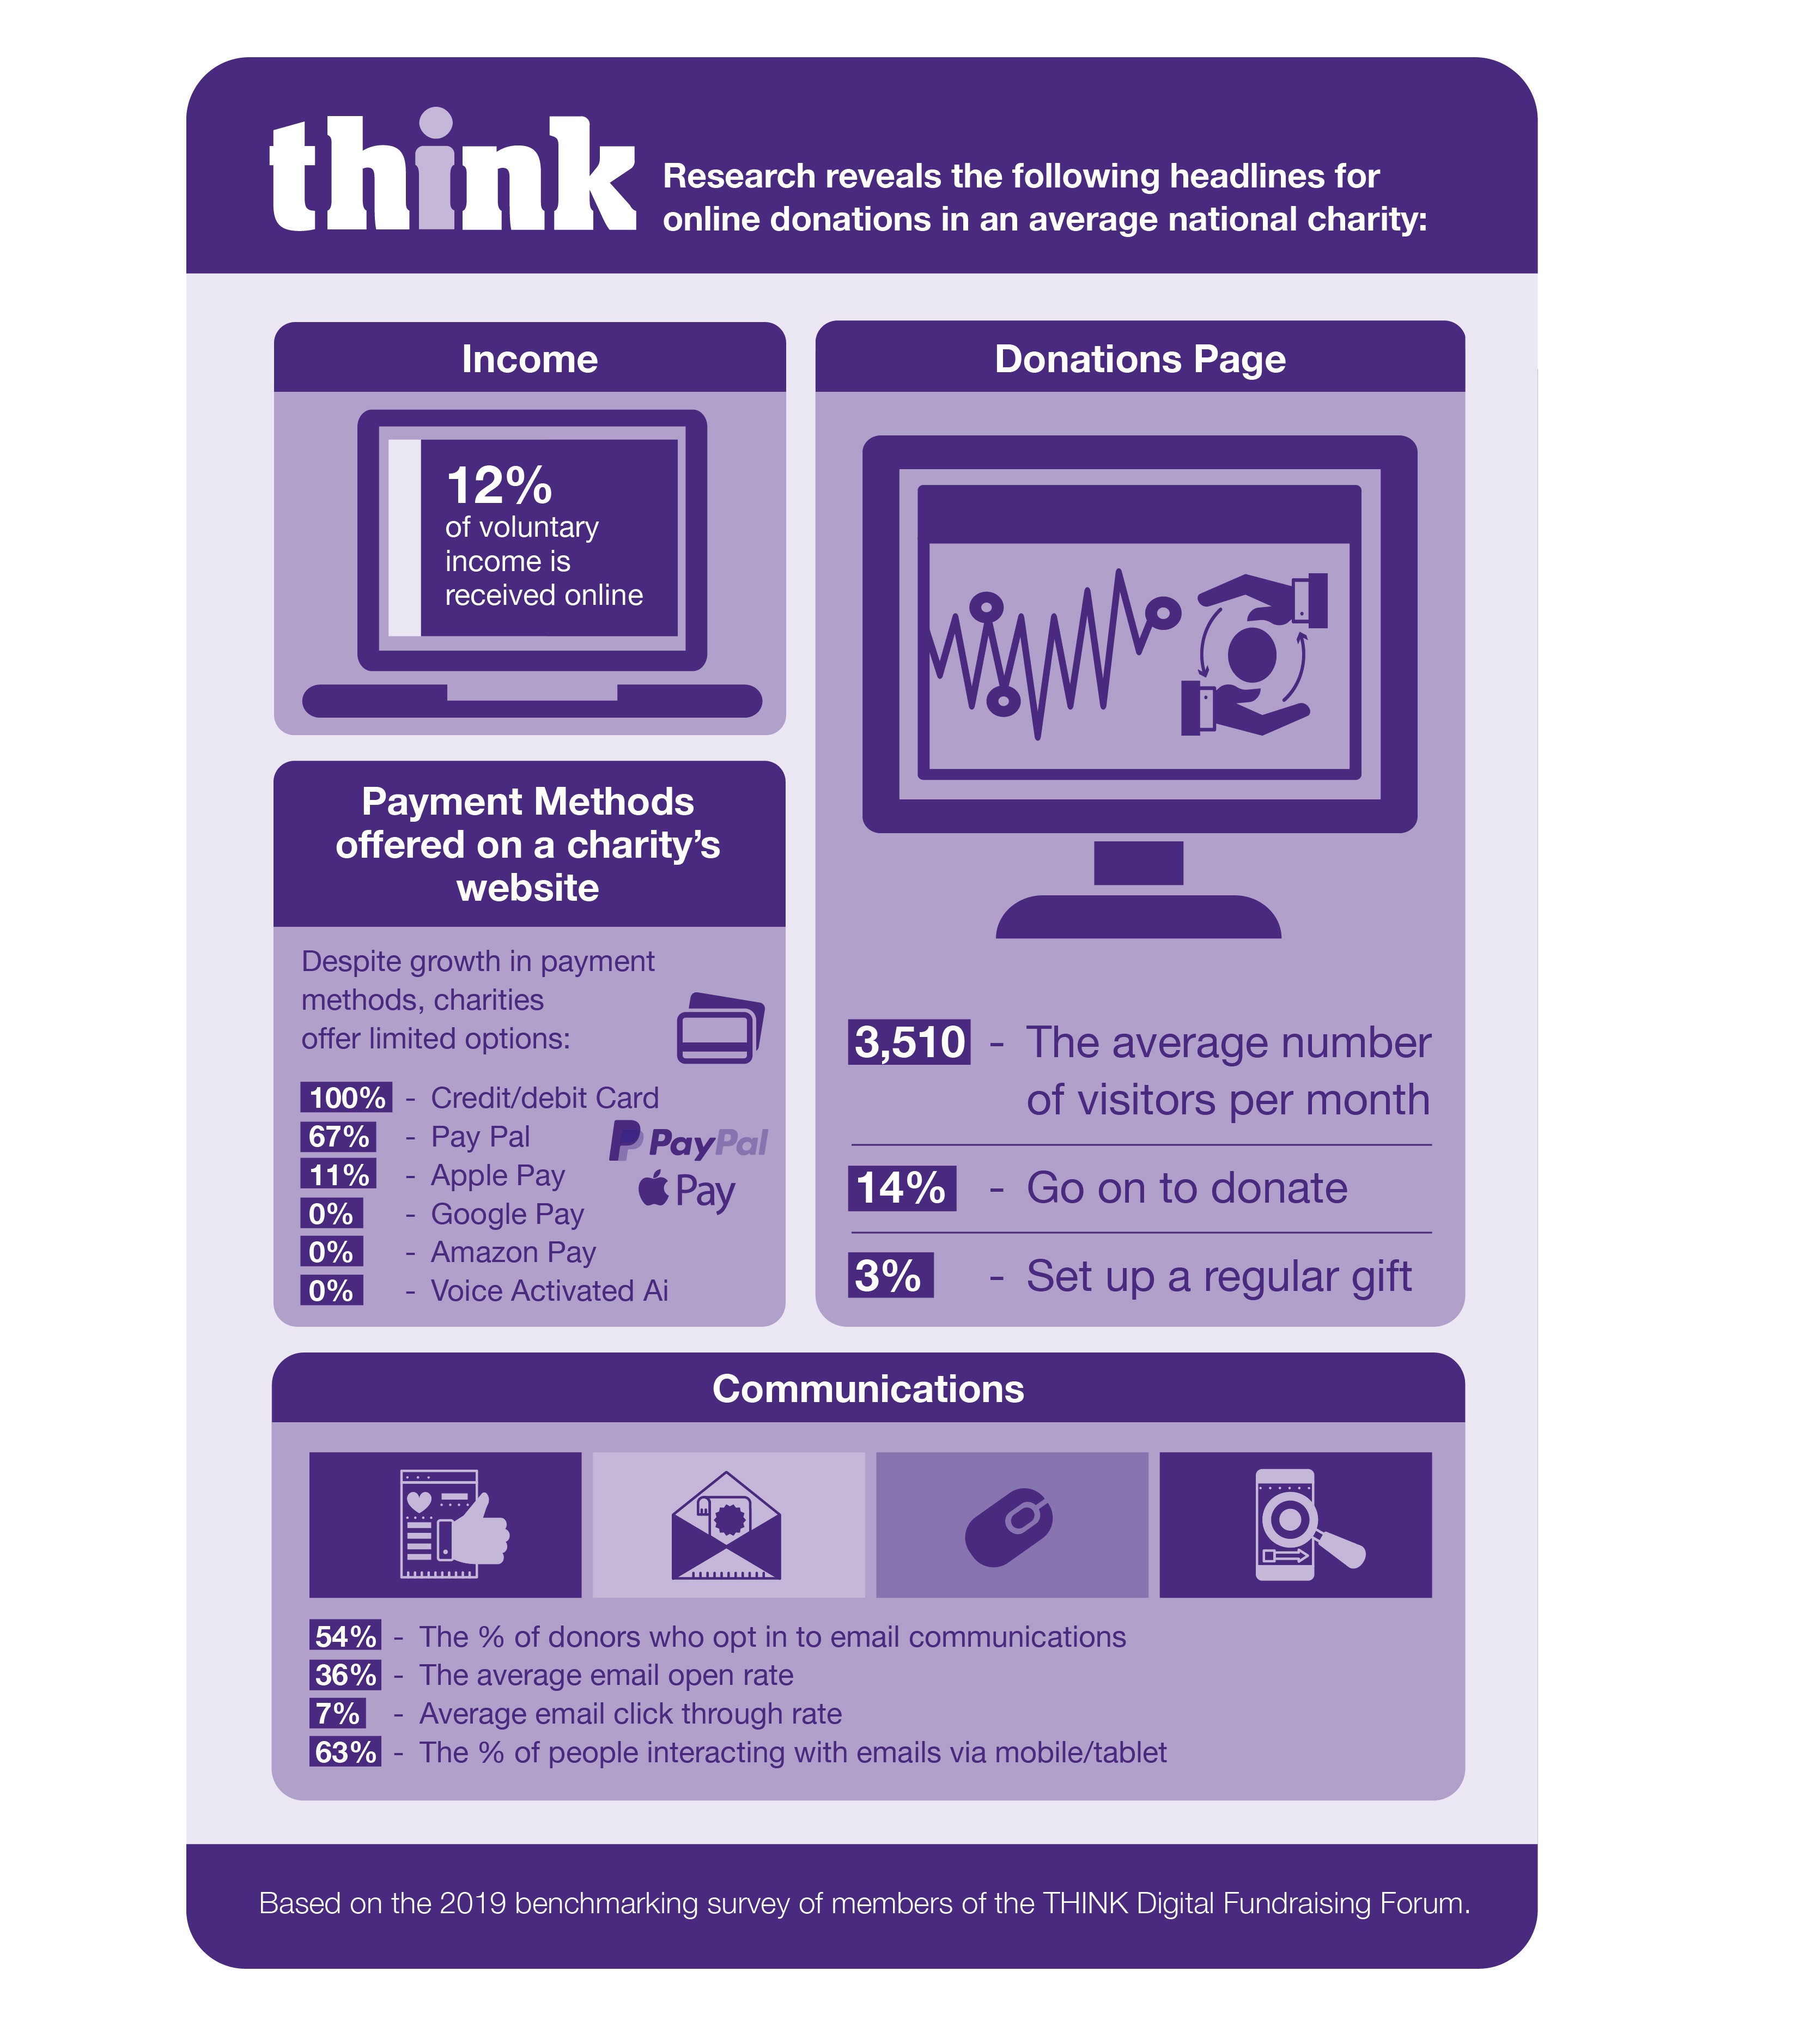 Infographic of THINK Digital Fundraising Forum benchmark 2019